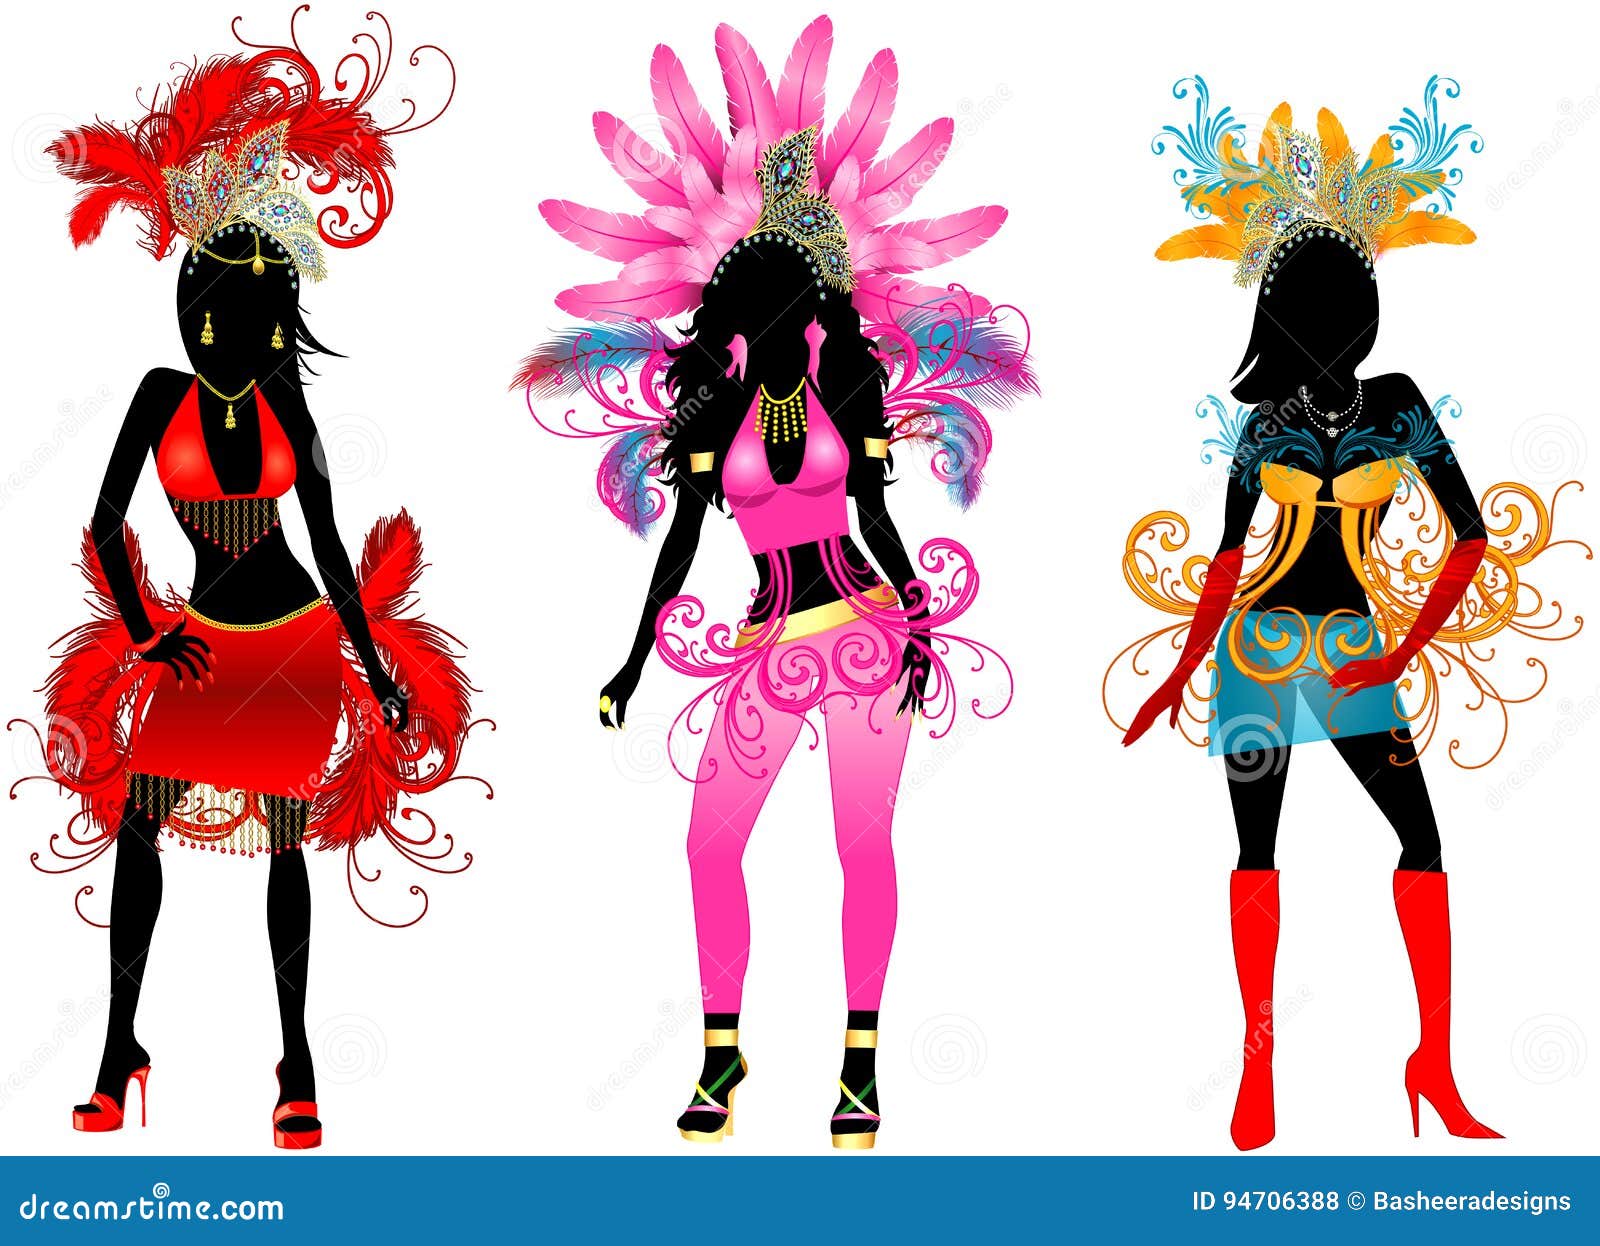 carnival silhouettes 3